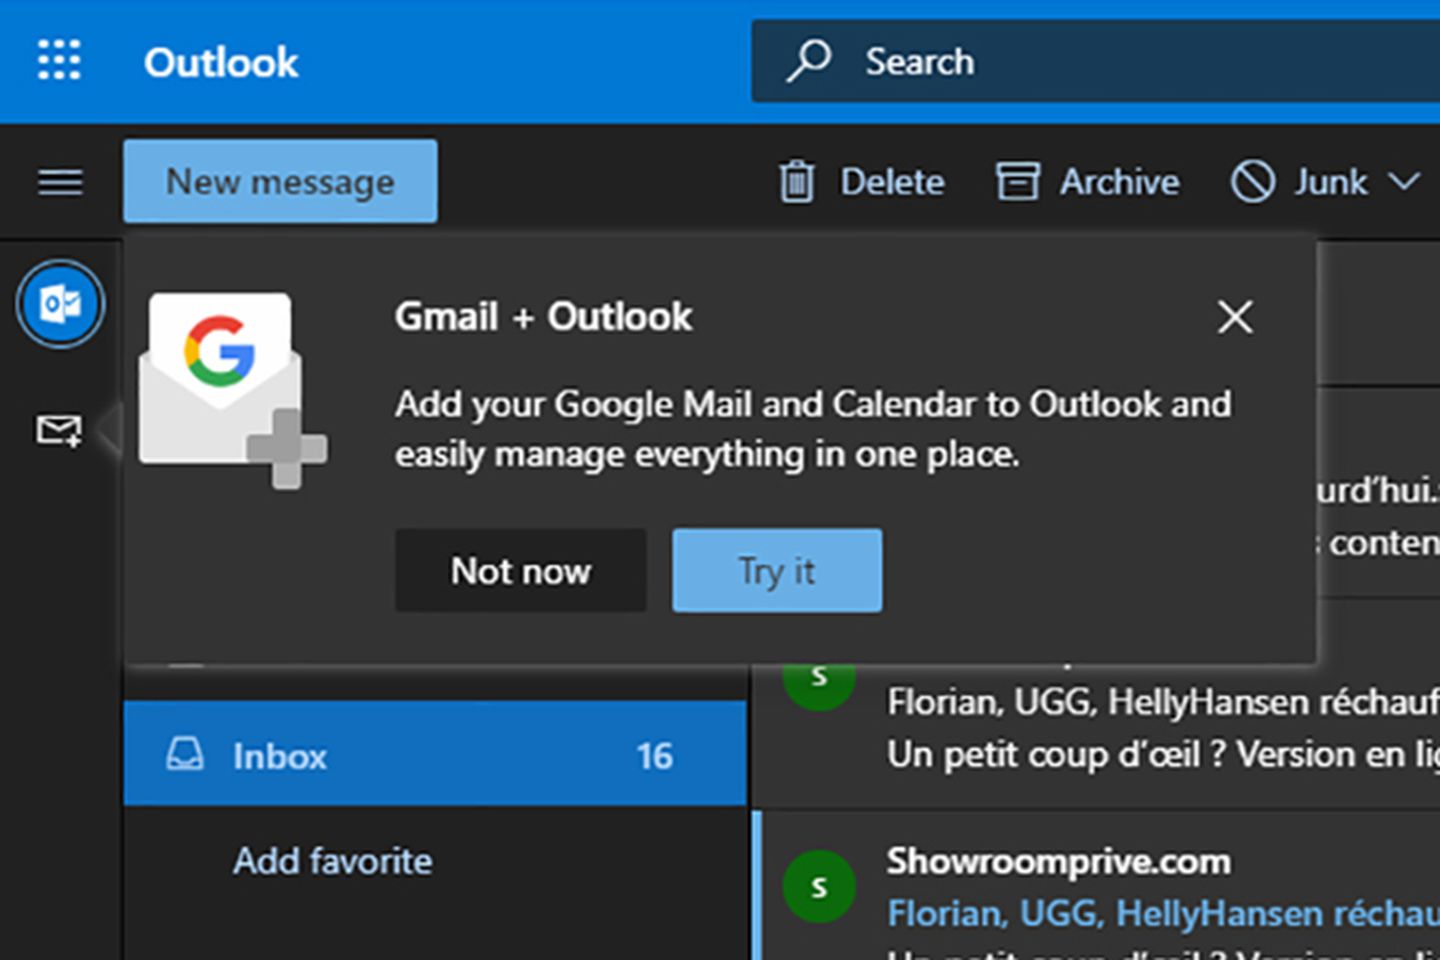 Microsoft is bringing Gmail, Google Drive, and Calendar to